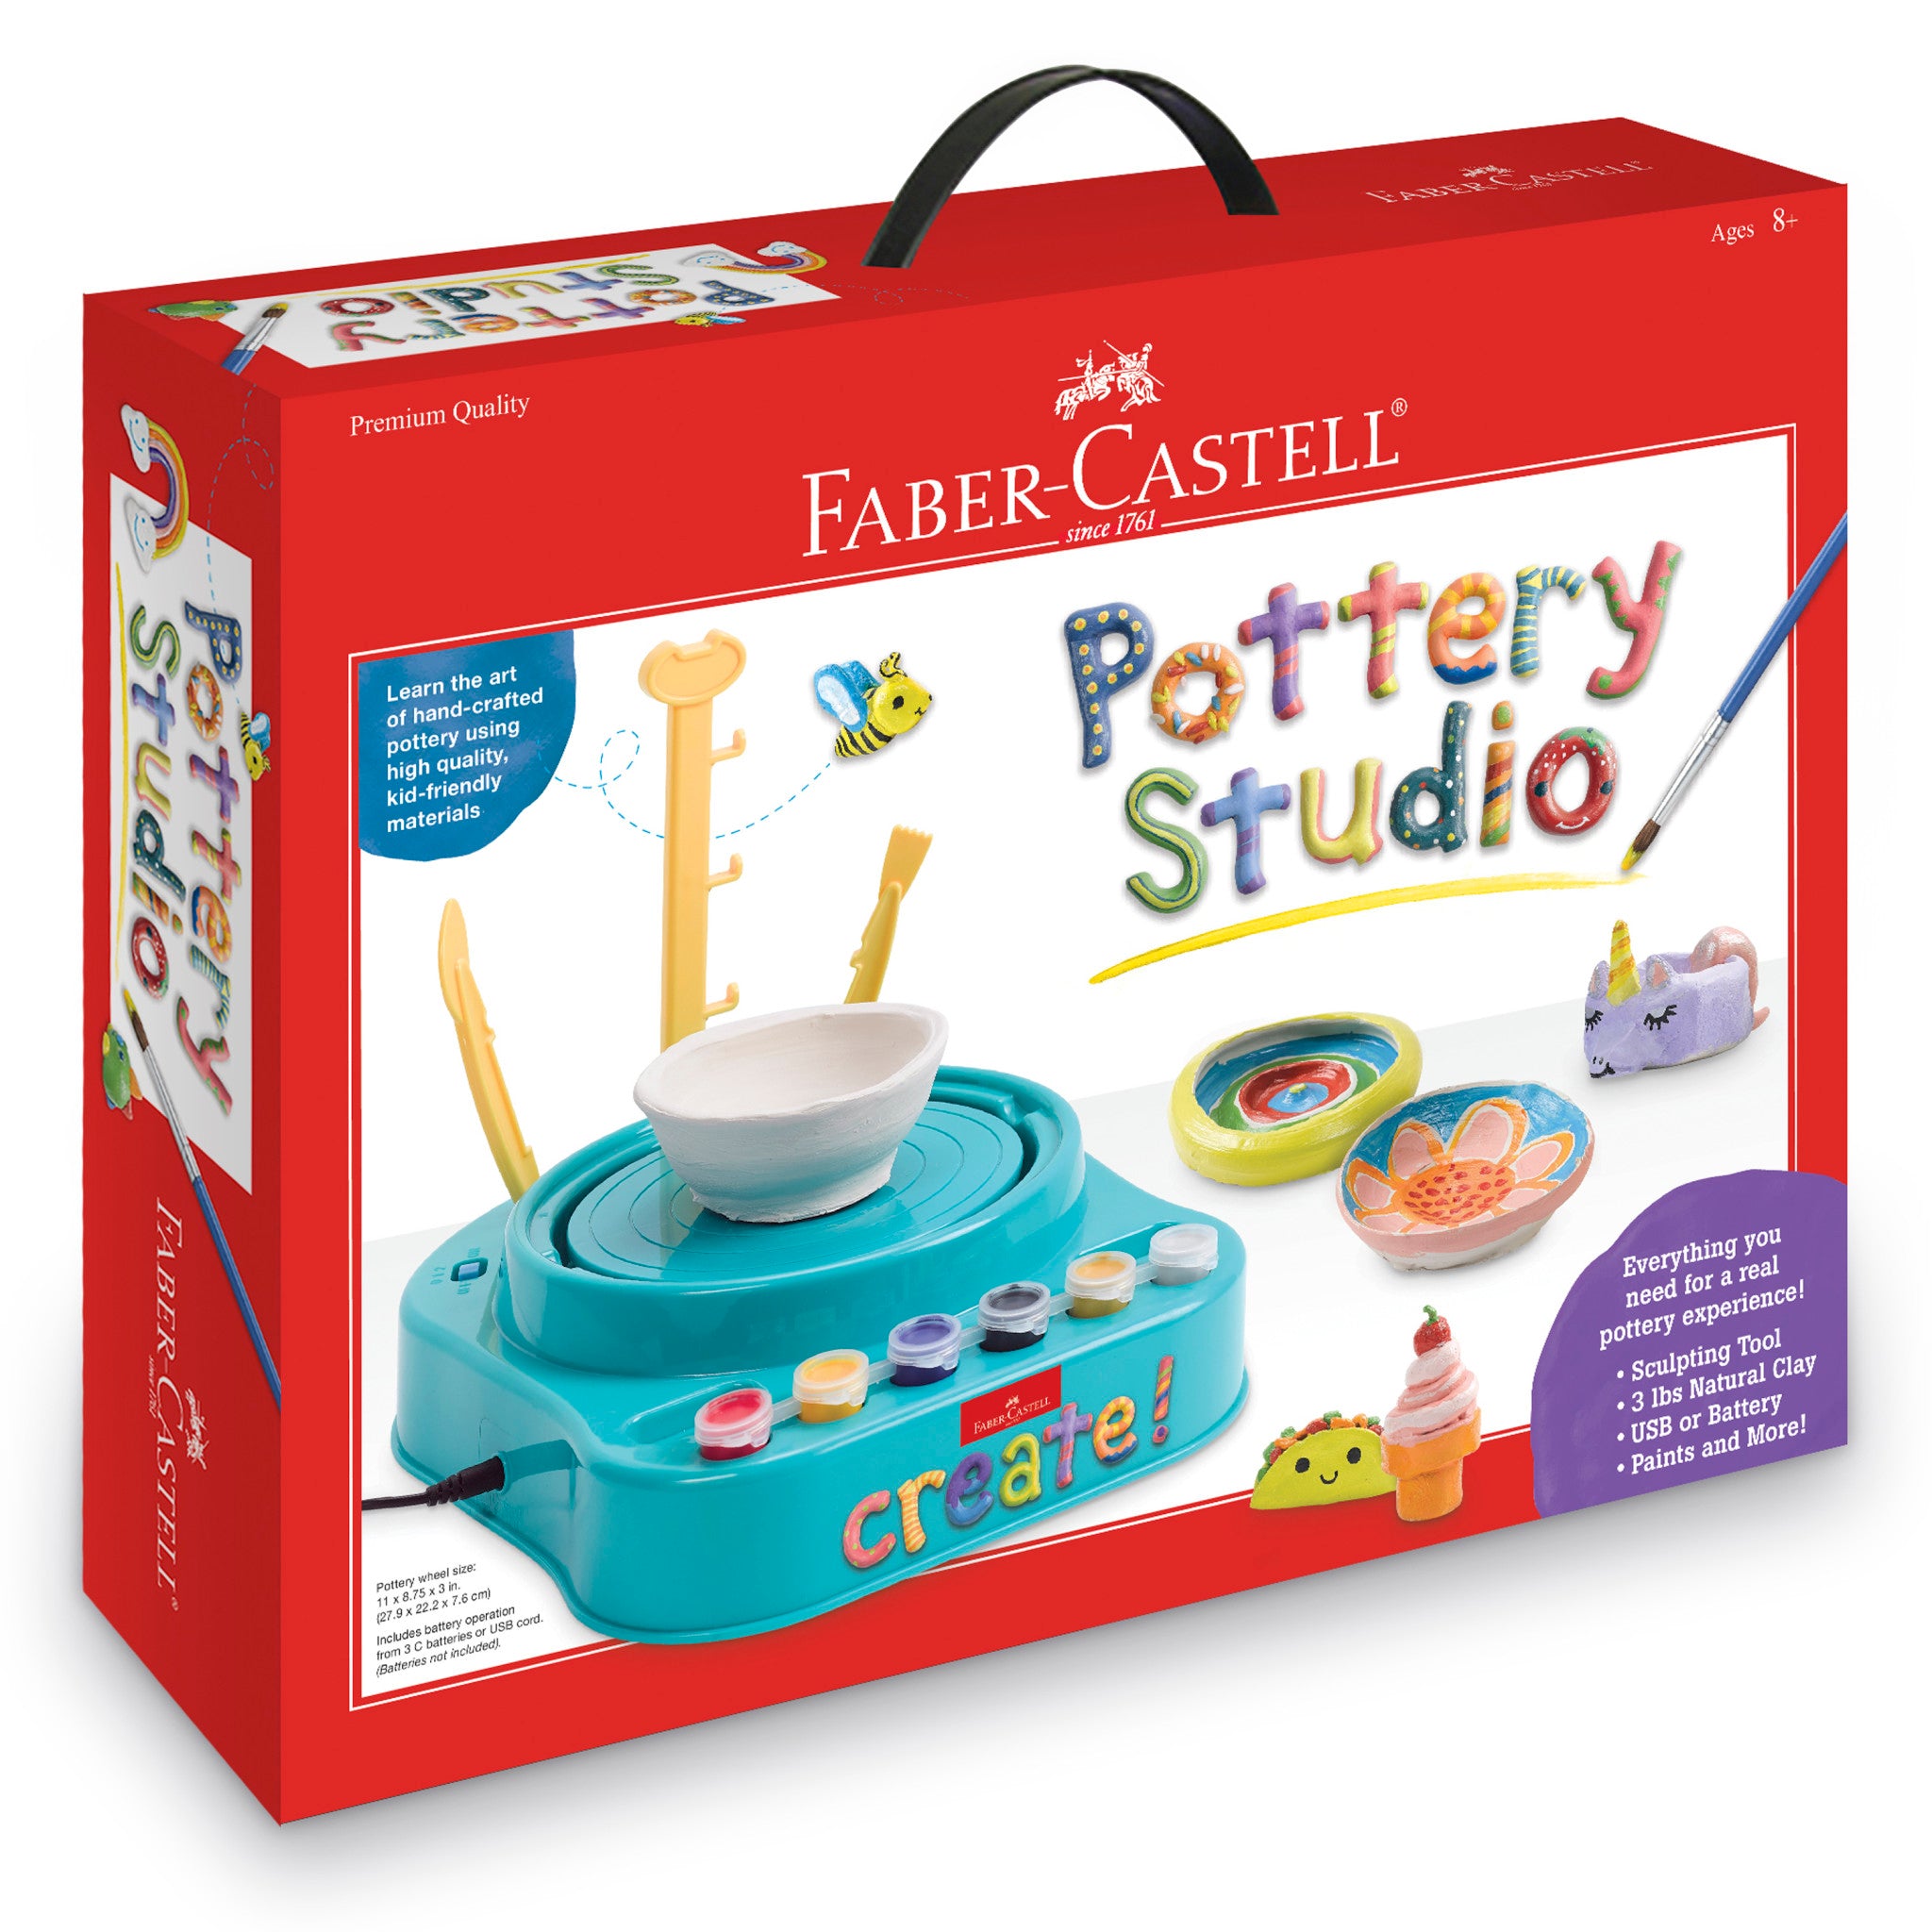  Faber-Castell Pottery Studio Refill Kit - 2 lbs. of Natural  Air-Dry Pottery Clay, 6 Paint Pots and Paintbrush, Clay Making Kit for Kids  : Arts, Crafts & Sewing